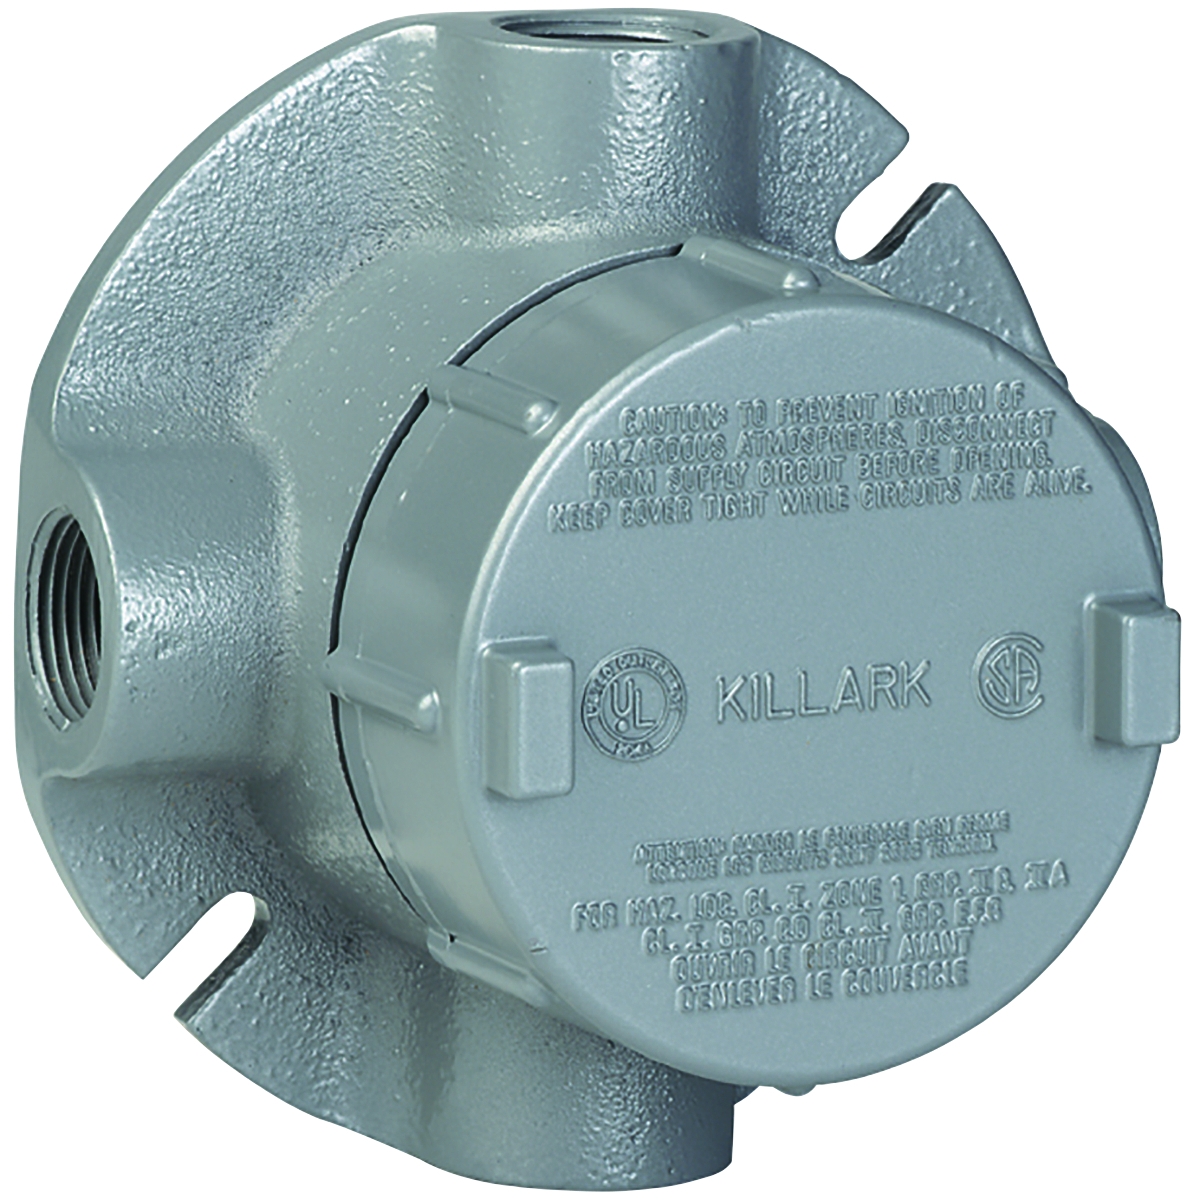 GEC SERIES FITTINGS - ALUMINUM - OUTLET BODIES WITH MOUNTING FLANGE -XTF TYPE OUTLET BODY - HUB SIZE 1 IN - VOLUME 19.0 CU IN